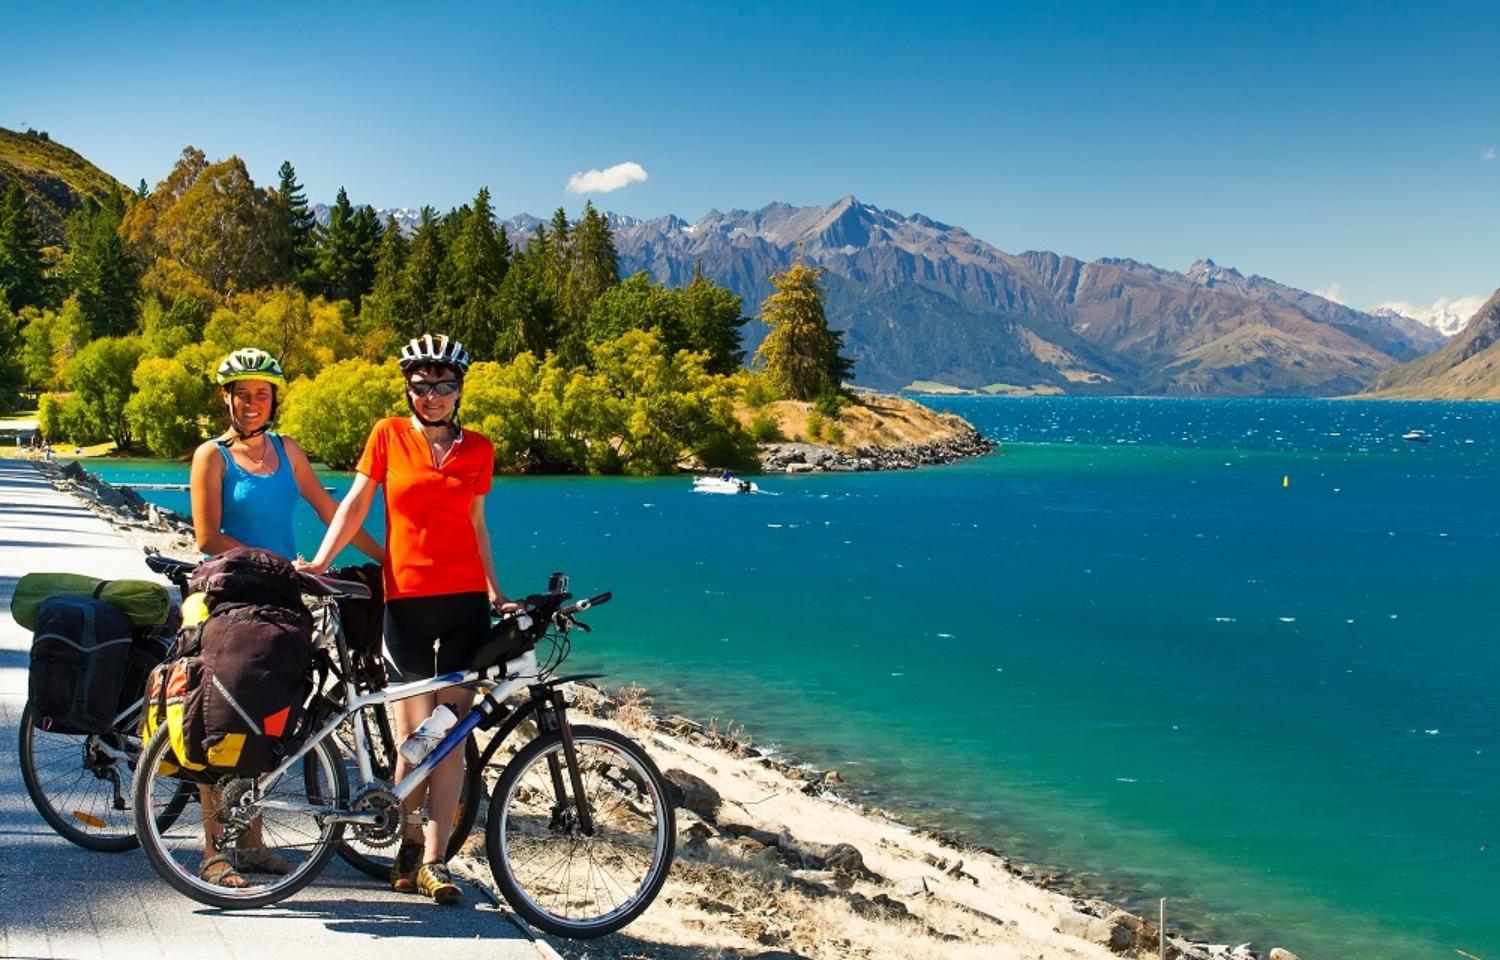 Bike hire in Annecy - 24 hours